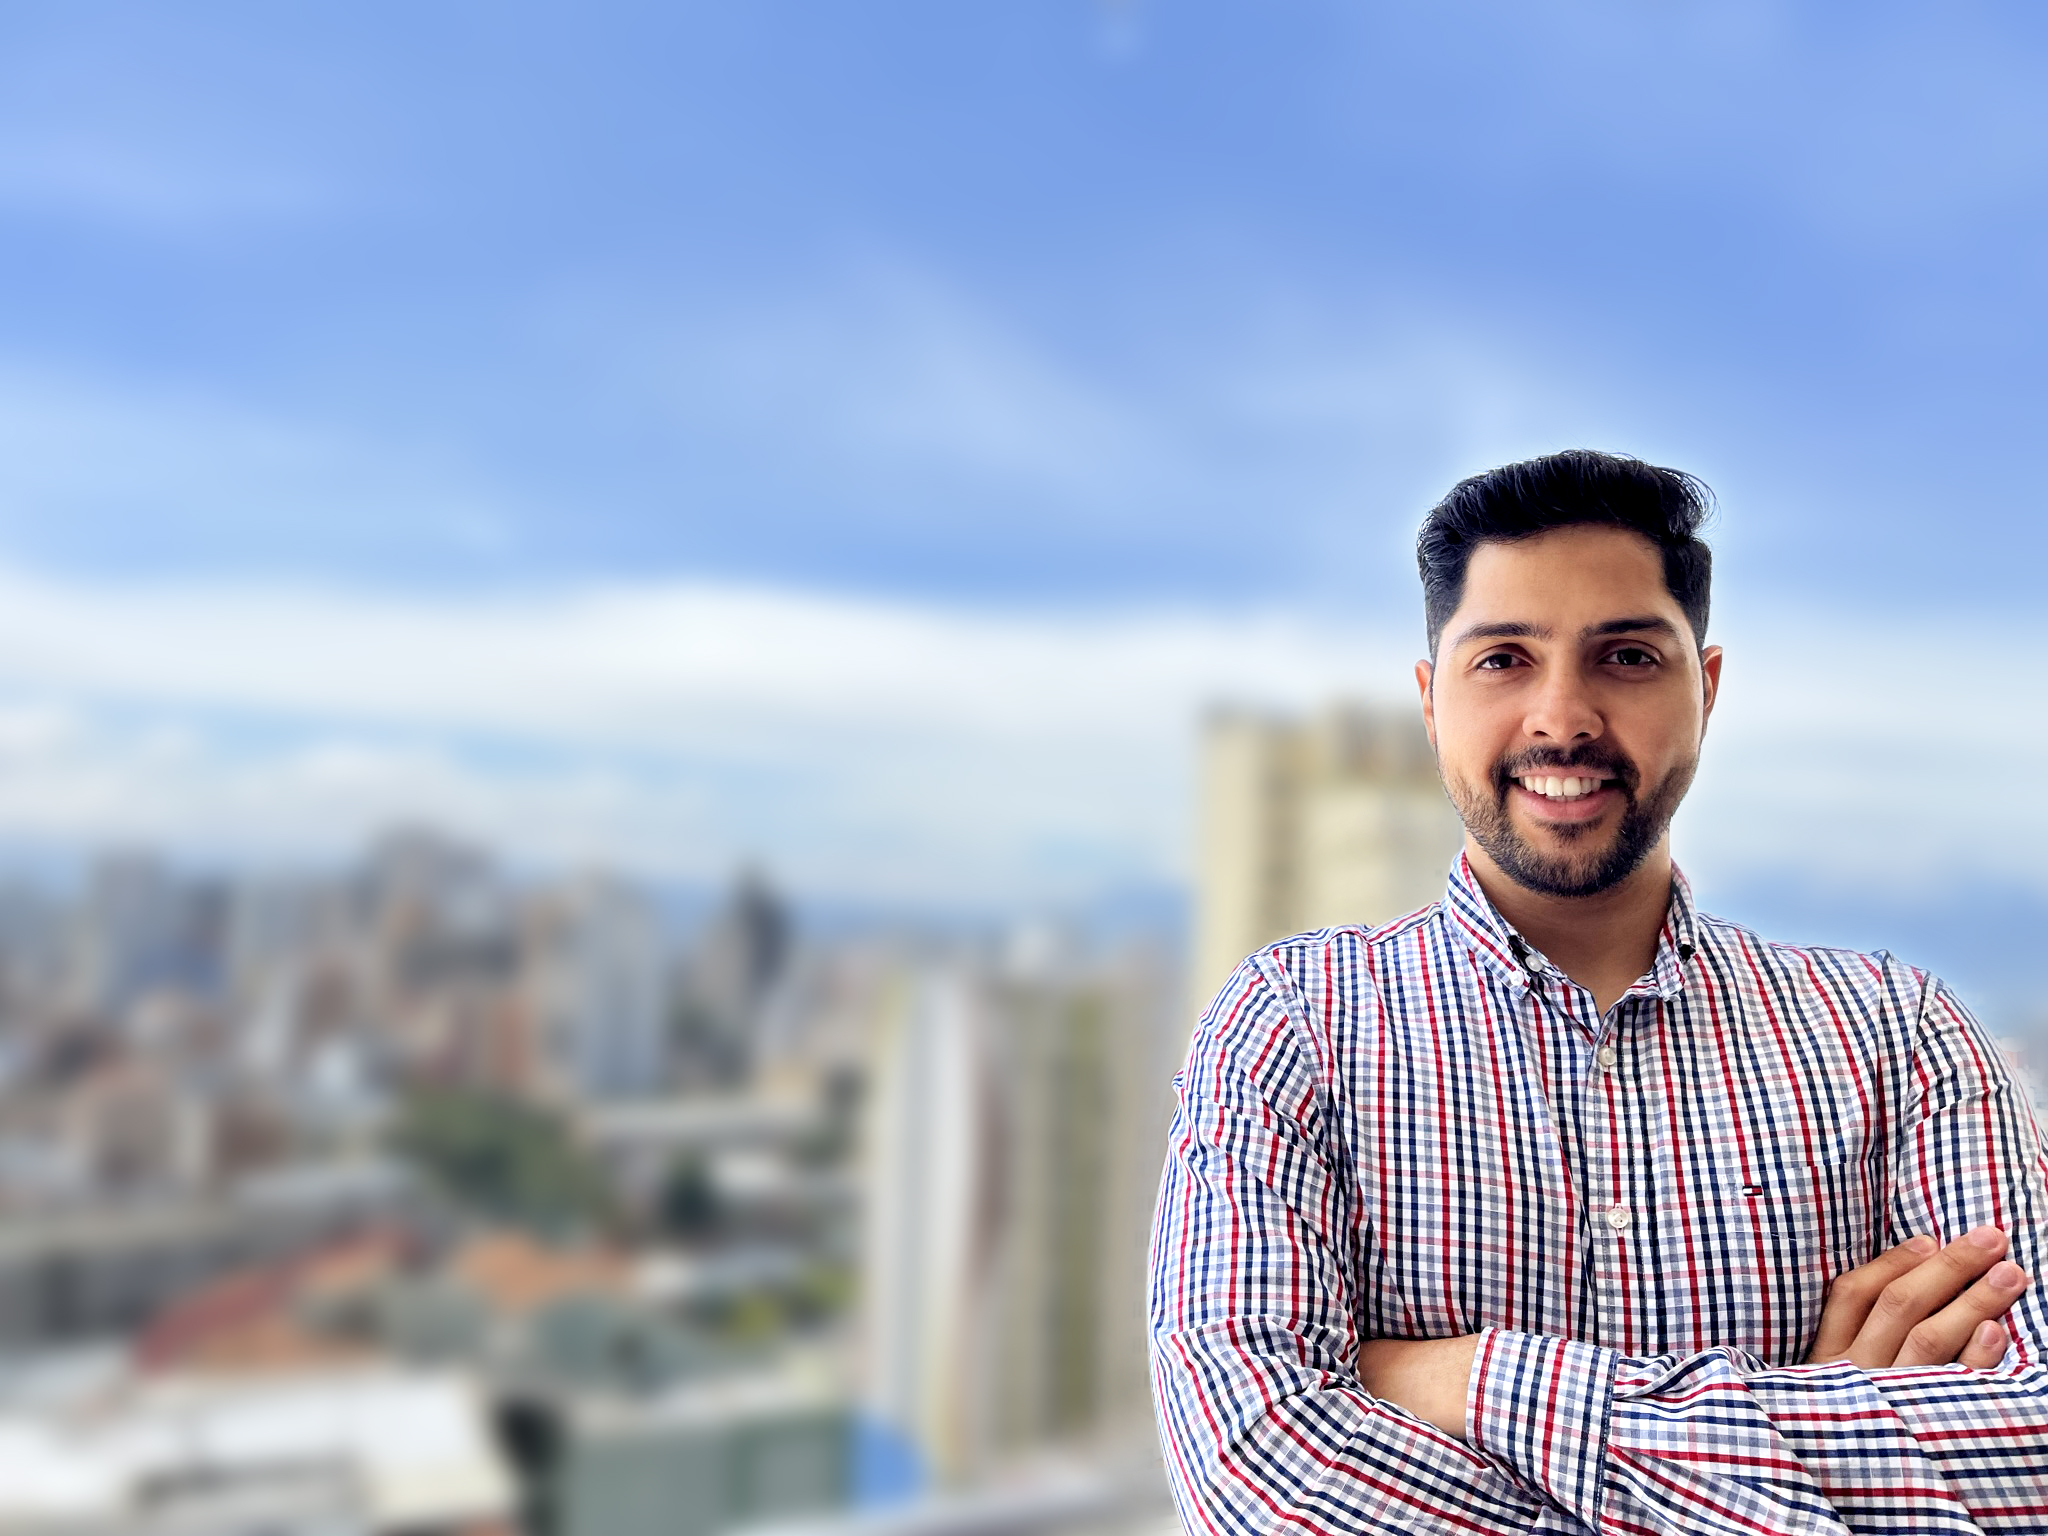 Carlos in front of a cityscape